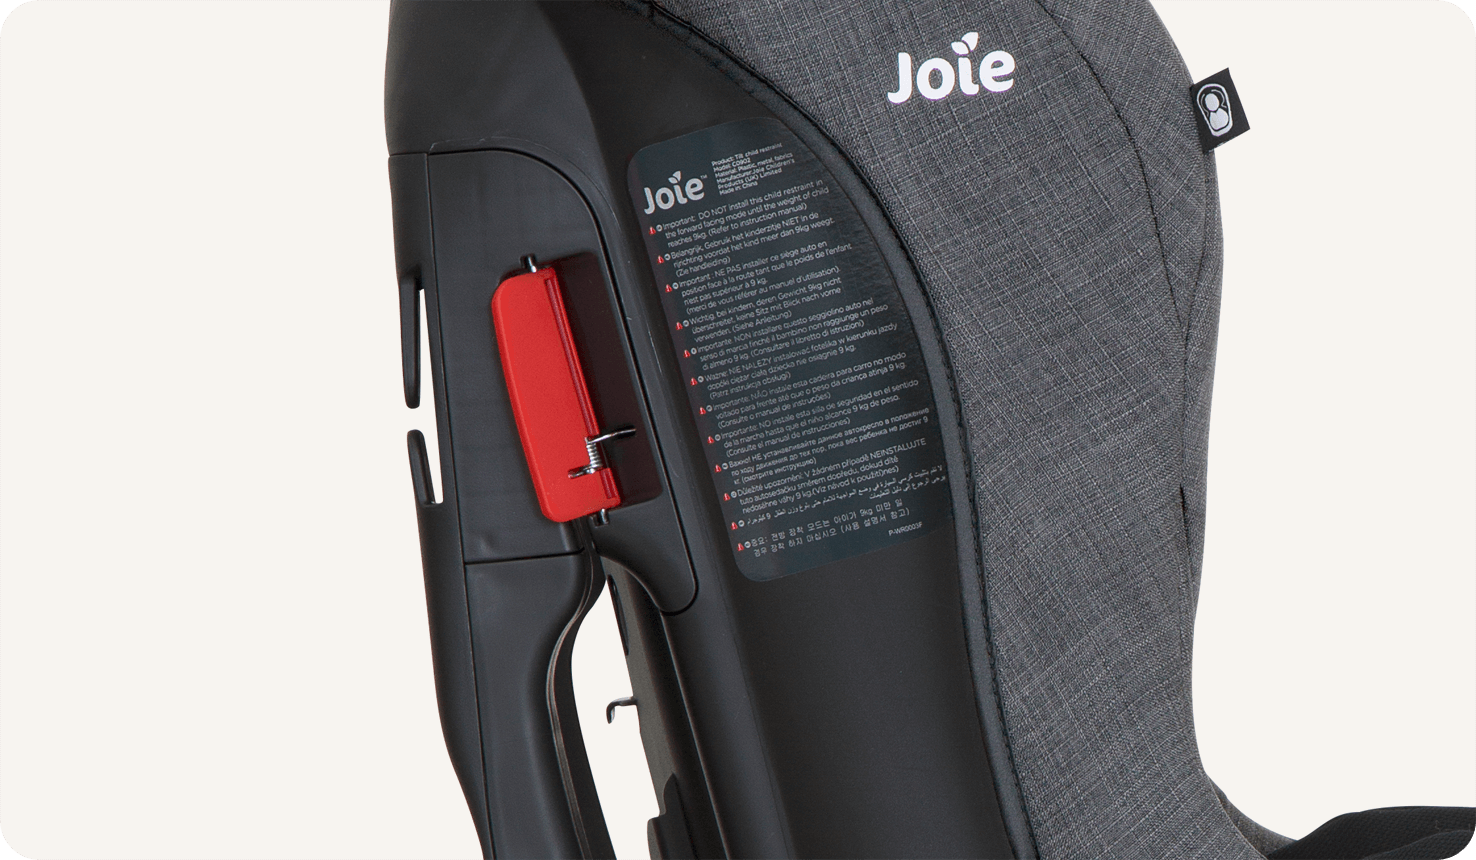  joie tilt car seat with seat belt tensioner to tightly fasten the seat belt during install